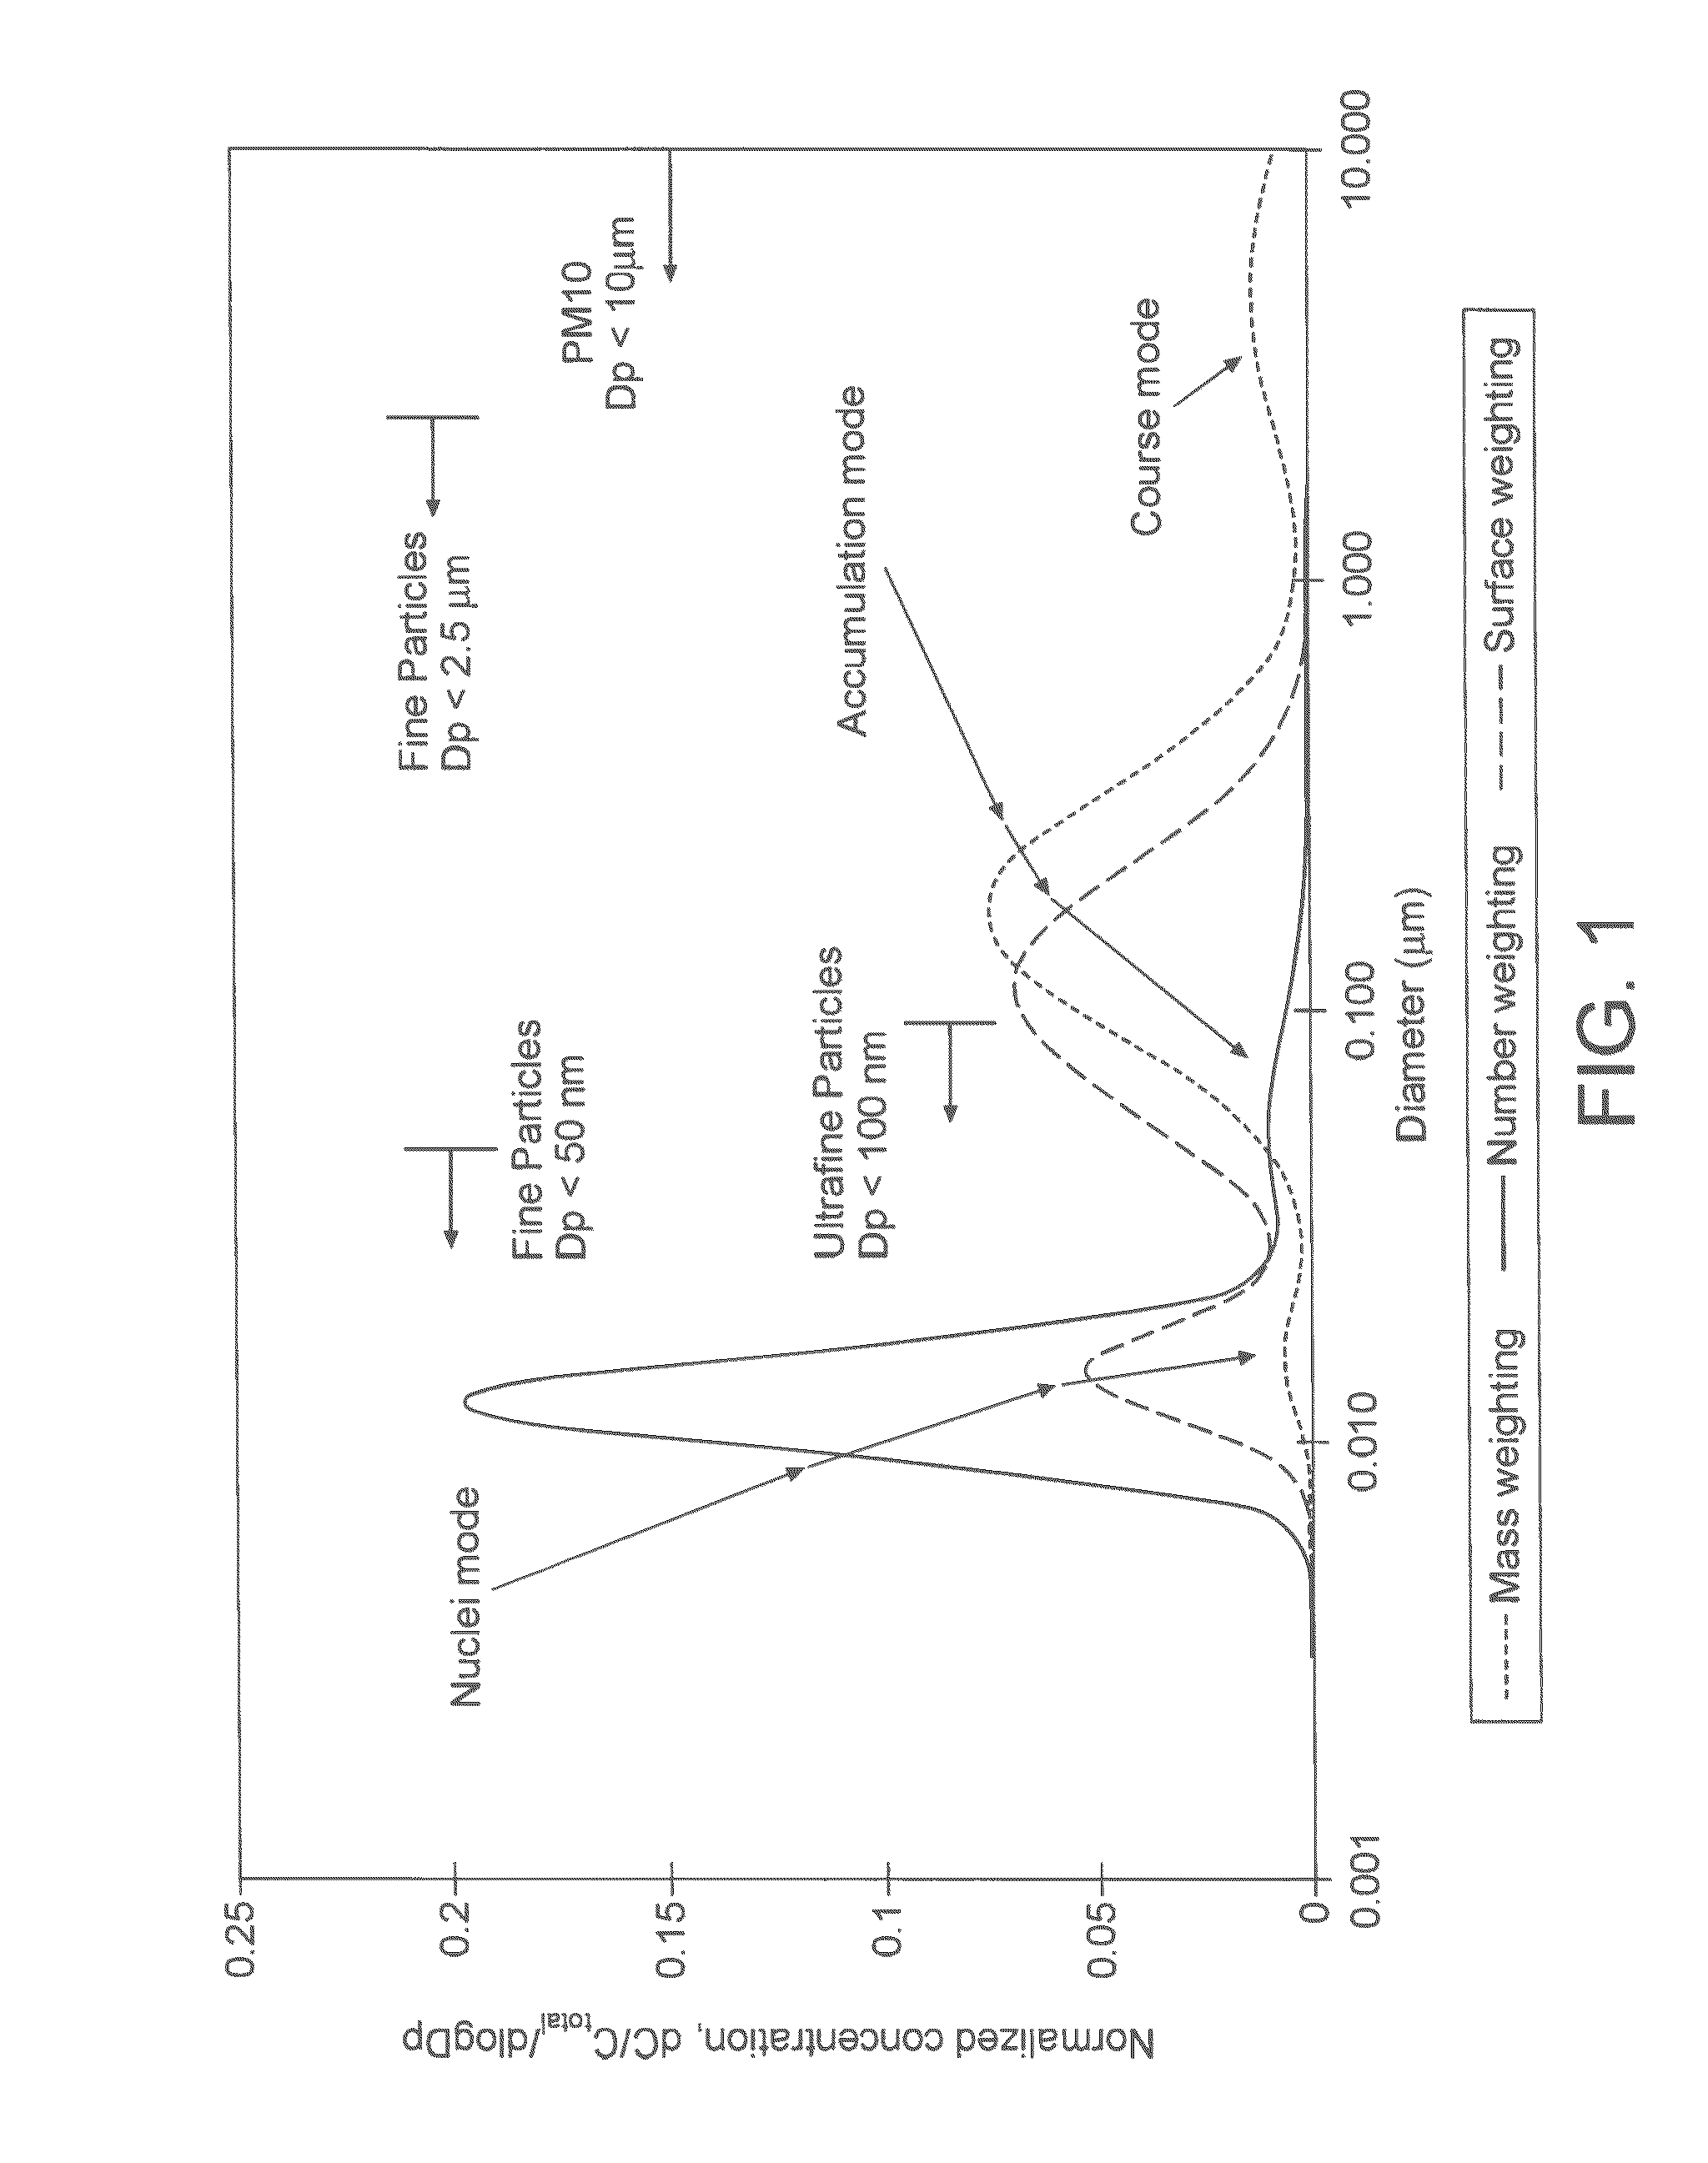 Positive Ignition Engine and Exhaust System Comprising Three-Way Catalysed Filter